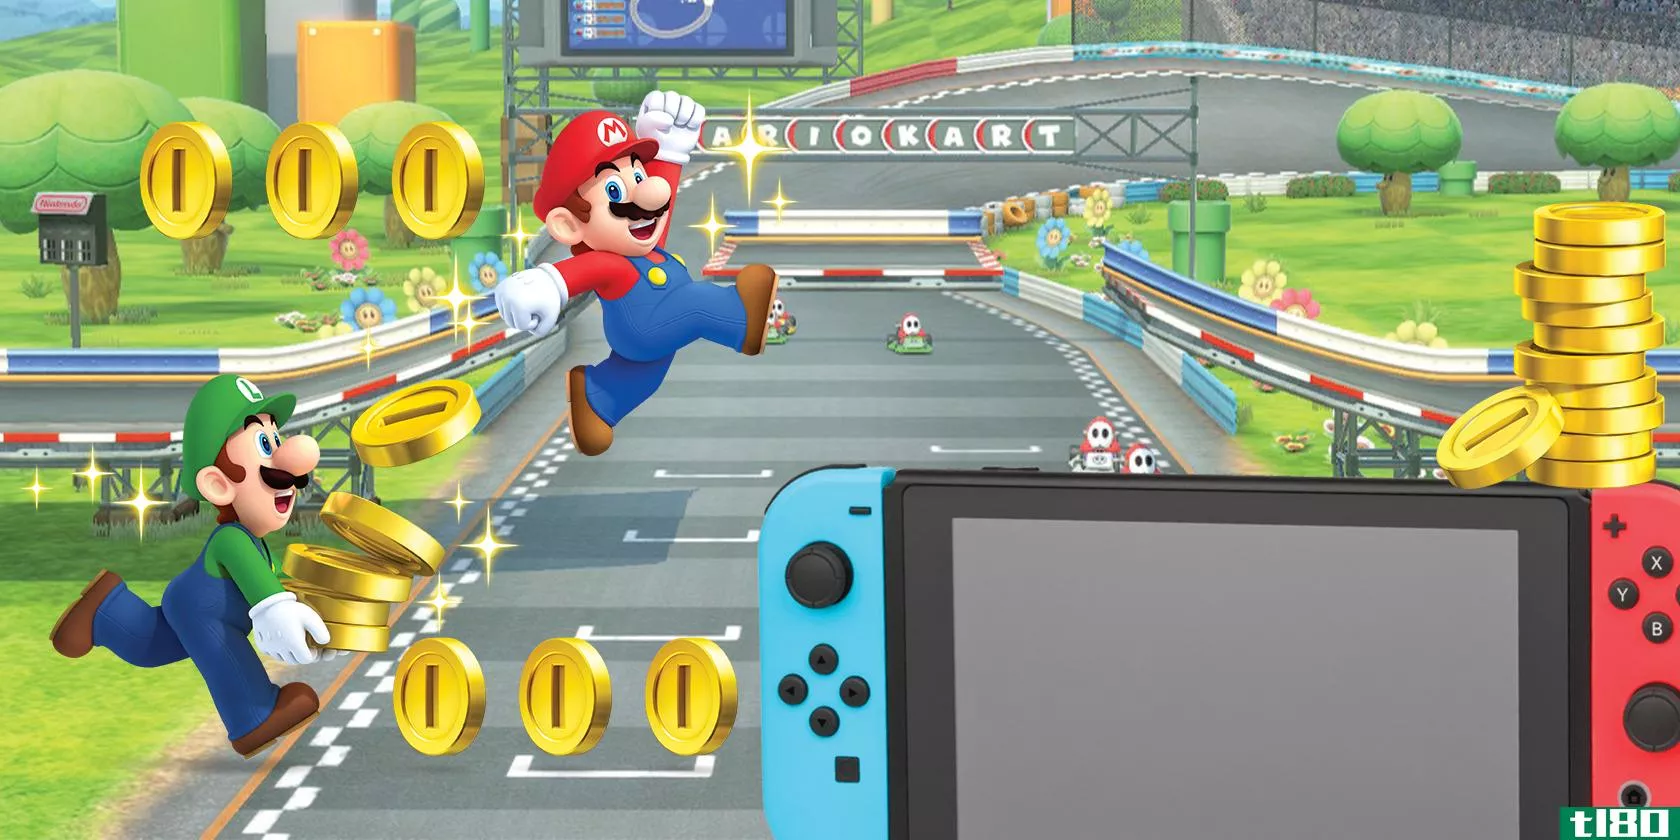 mario and luigi stacking coins on top of a nintendo switch c***ole with a mario kart background